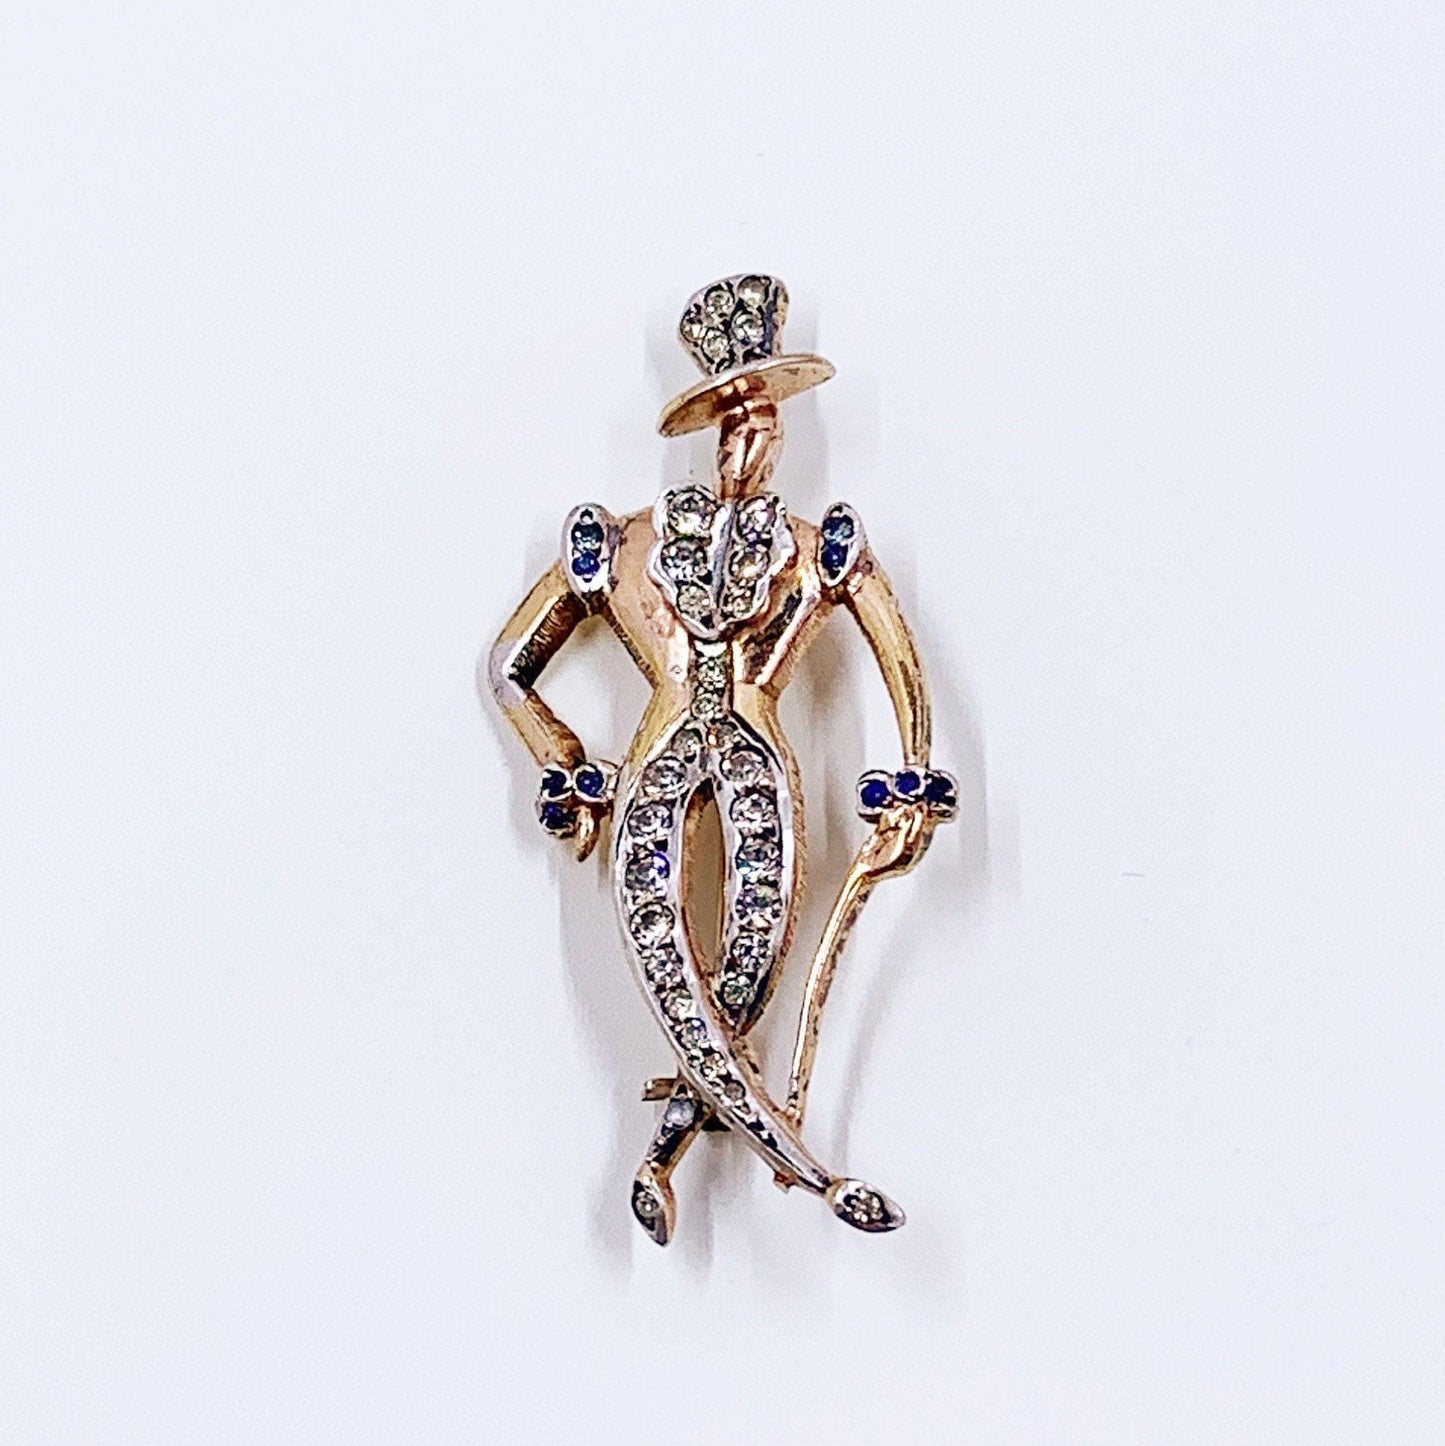 Vintage French Silver Figural Man in Top Hat Brooch | Blue and White Rhinestone Brooch